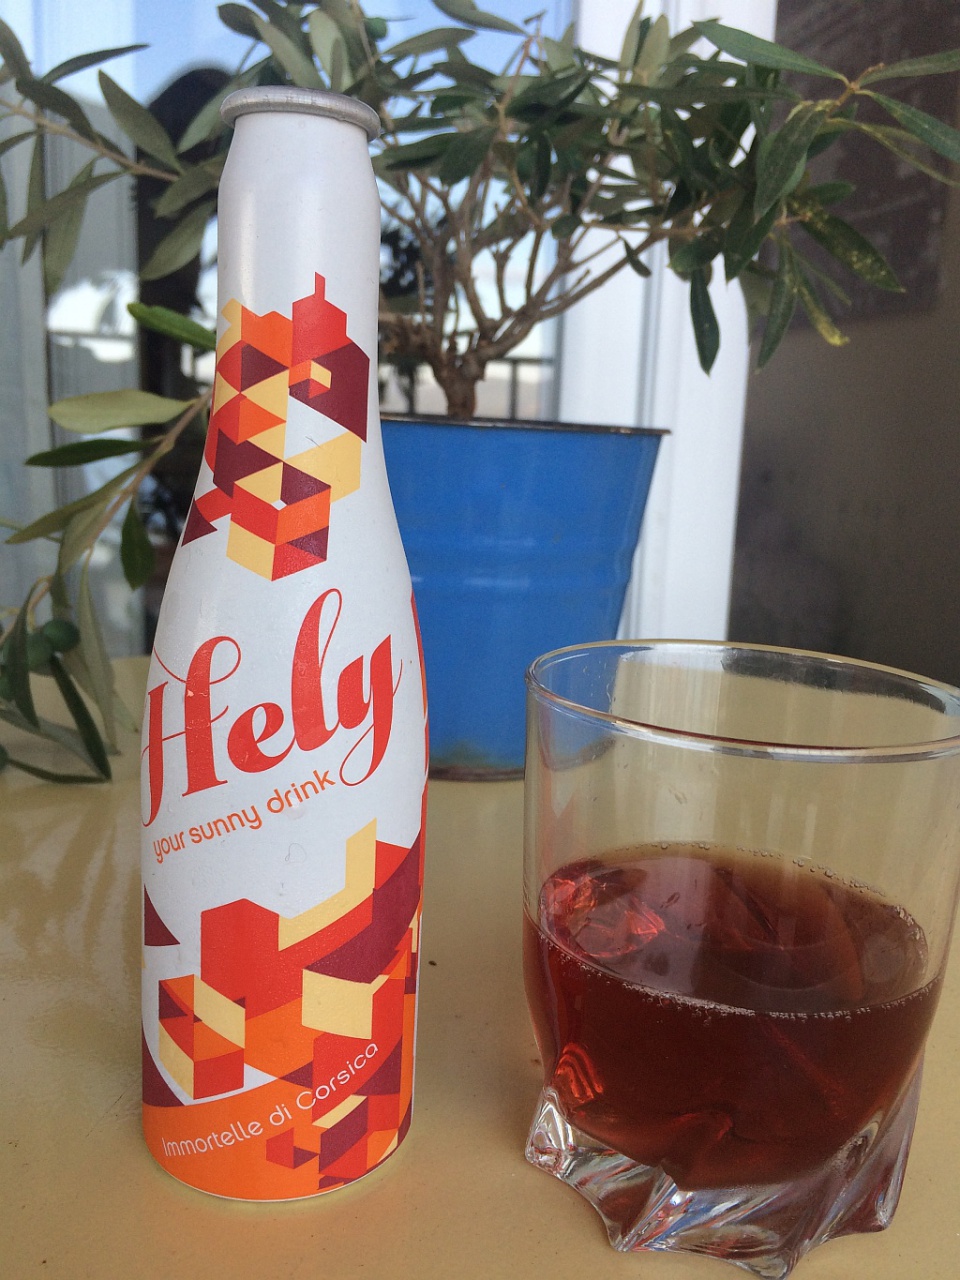 Hely soda a l'immortelle